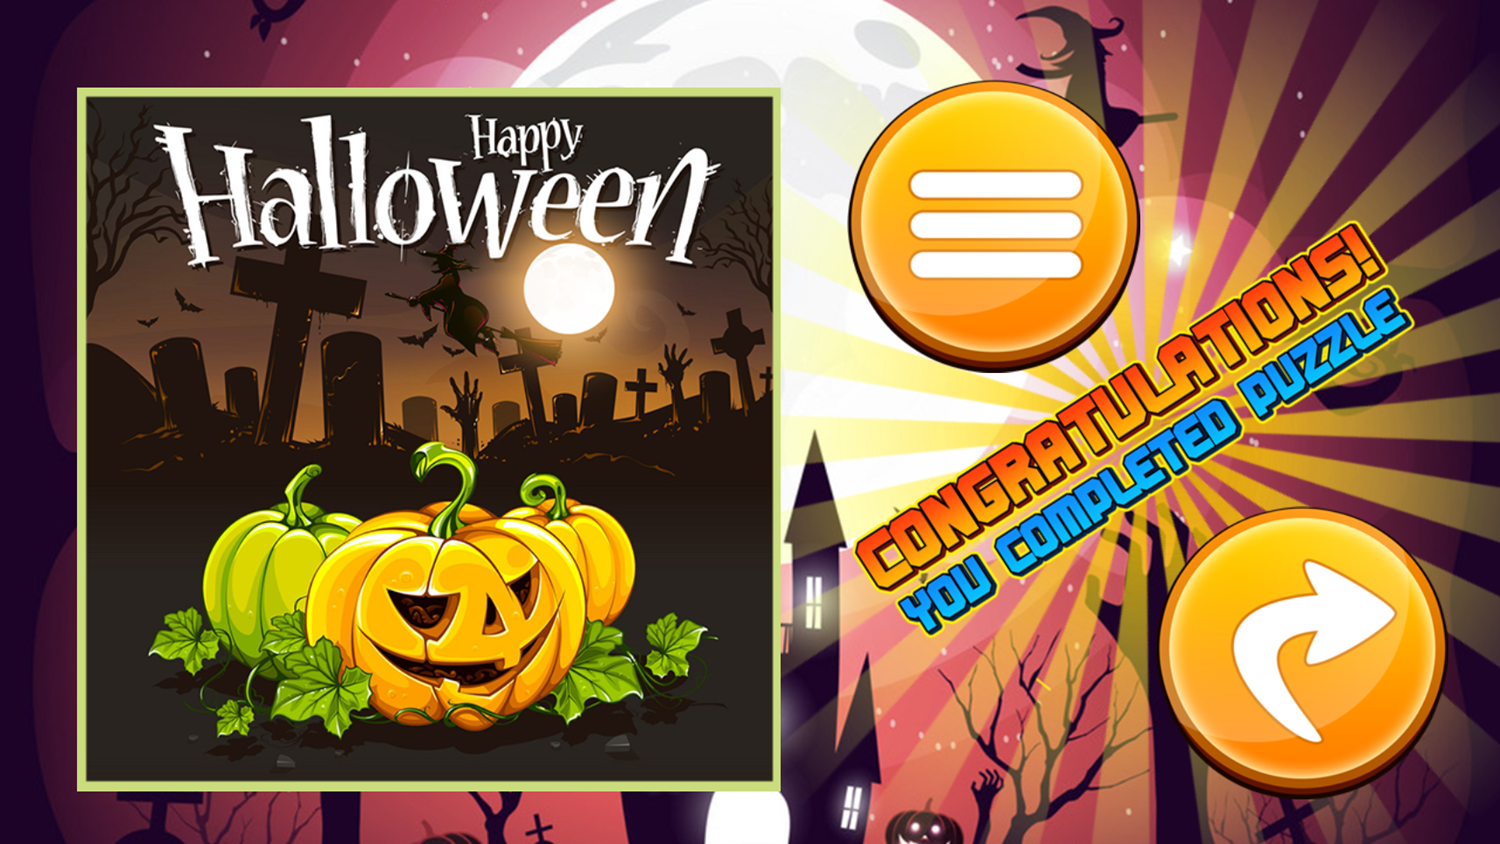 Happy Halloween Jigsaw Puzzle Game Complete Screenshot.